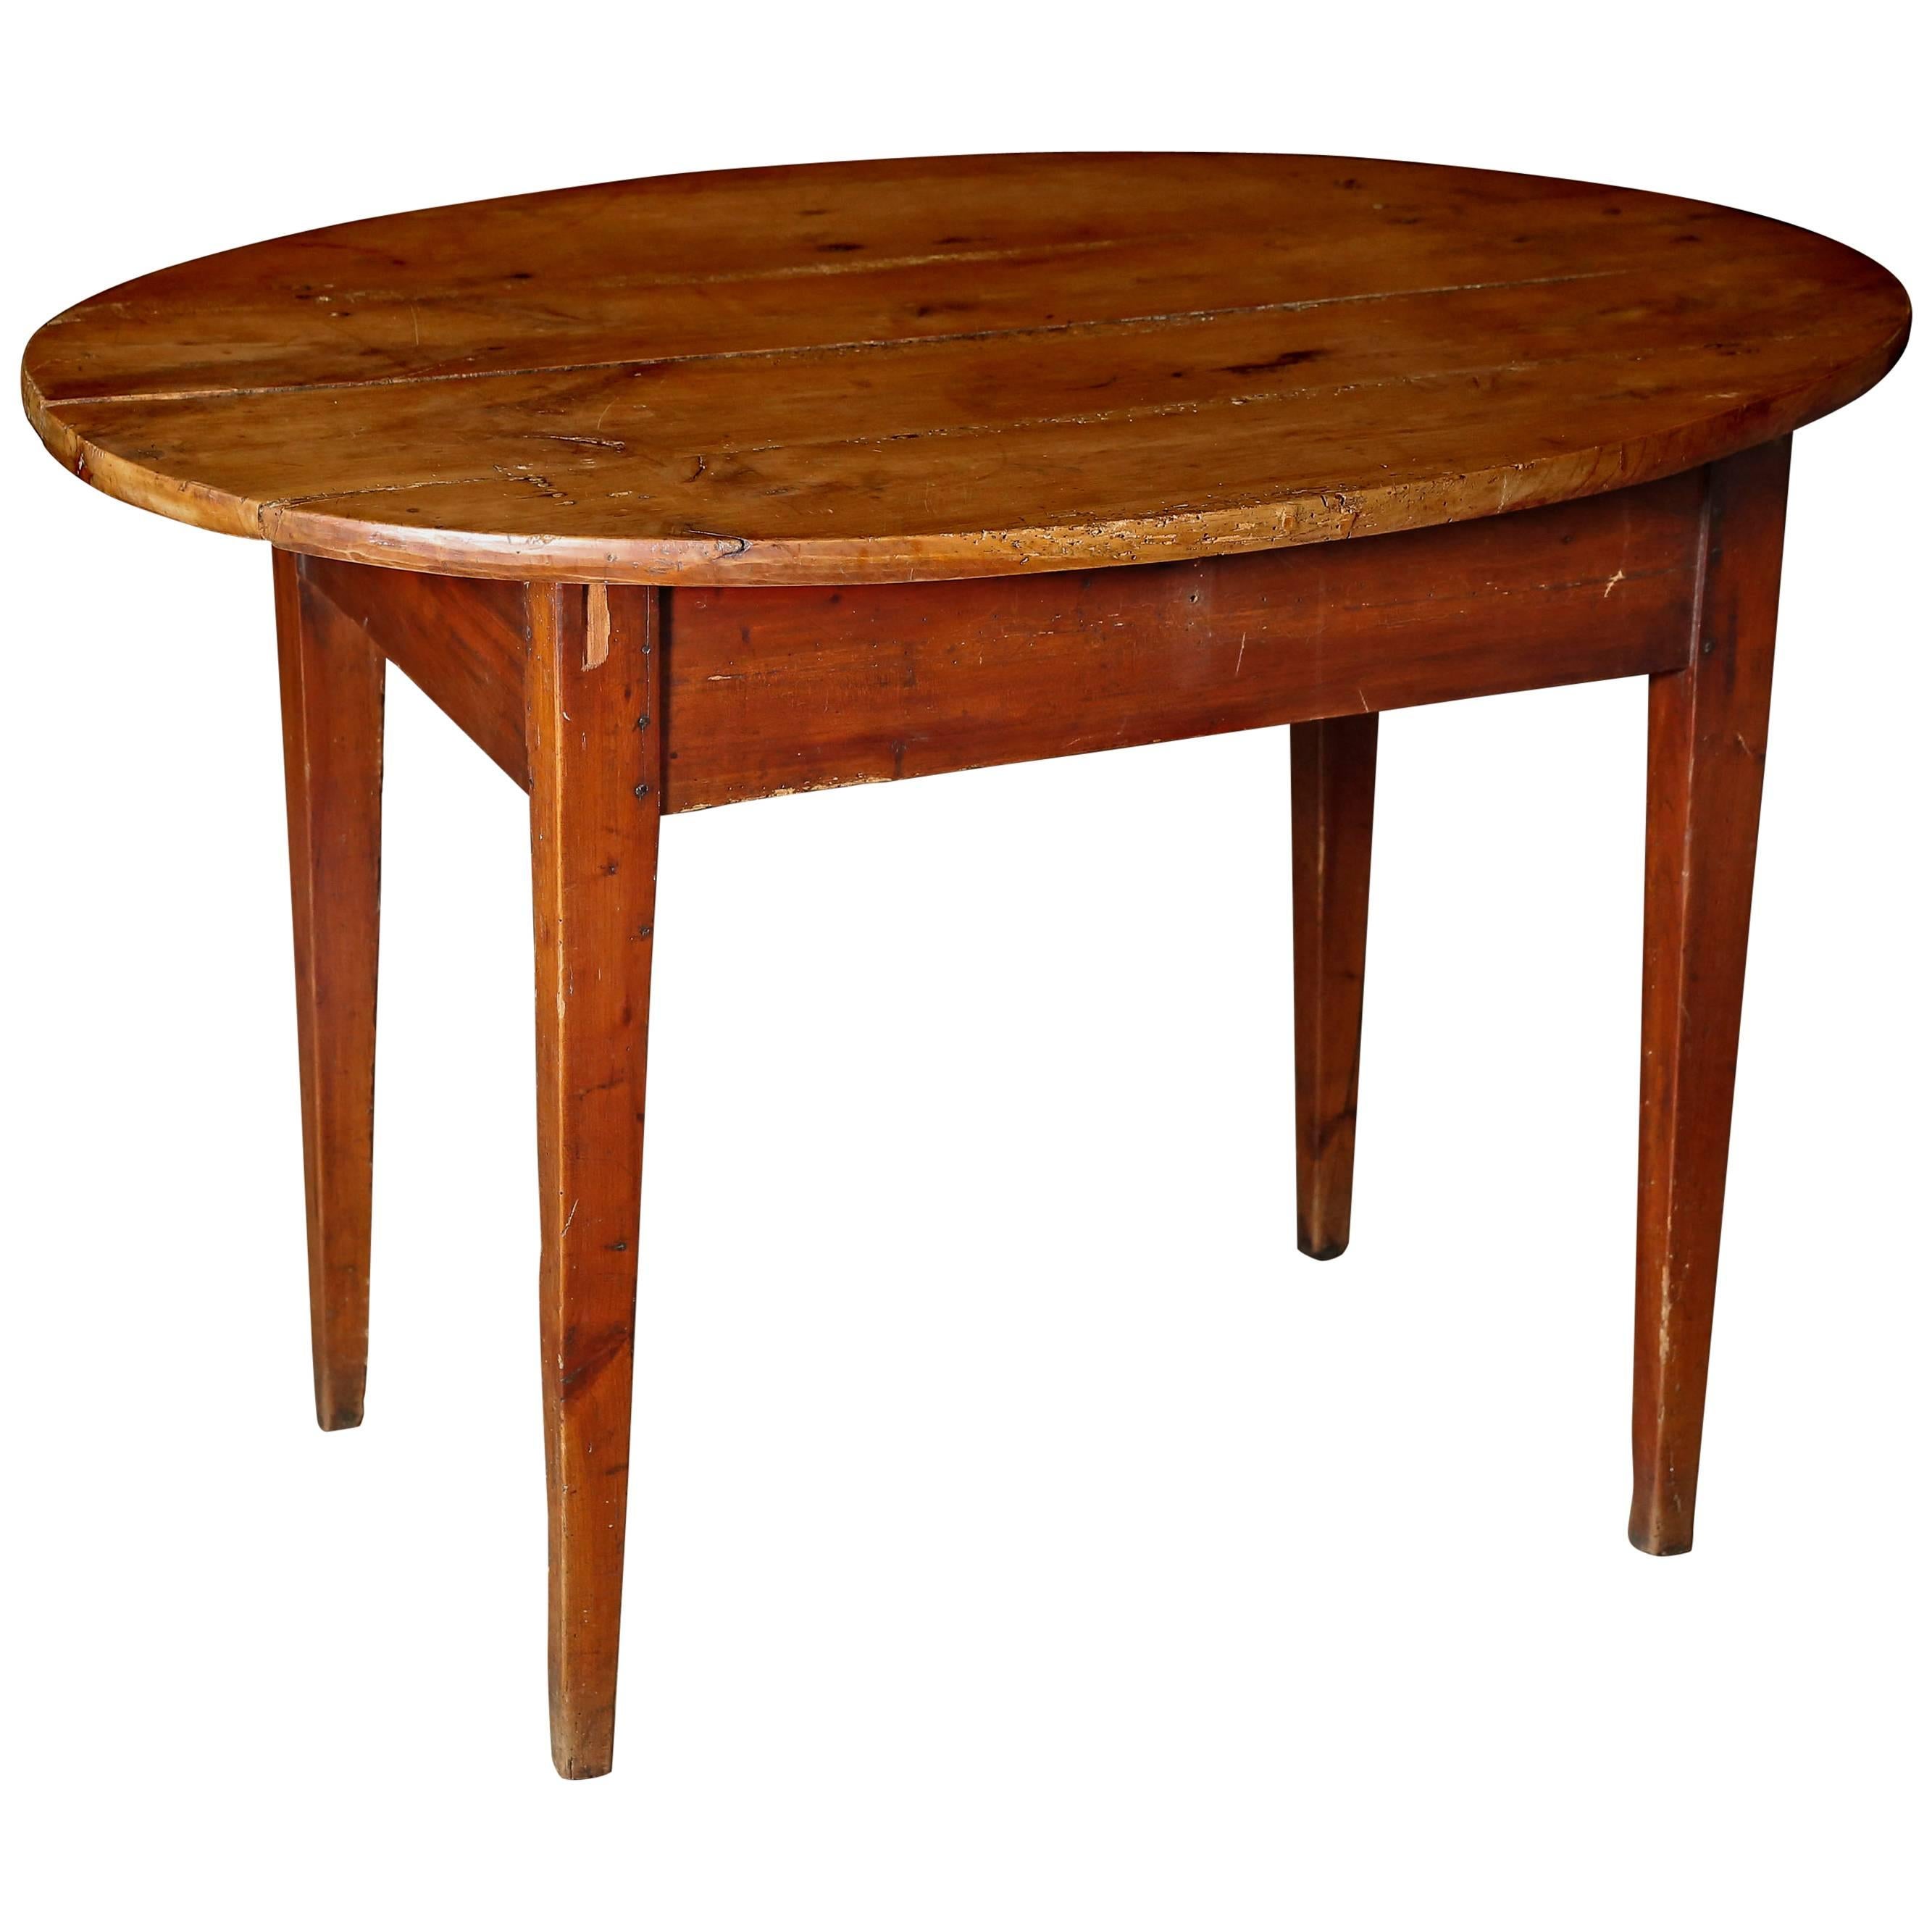 Antique 19th Century Cherry Oval Table